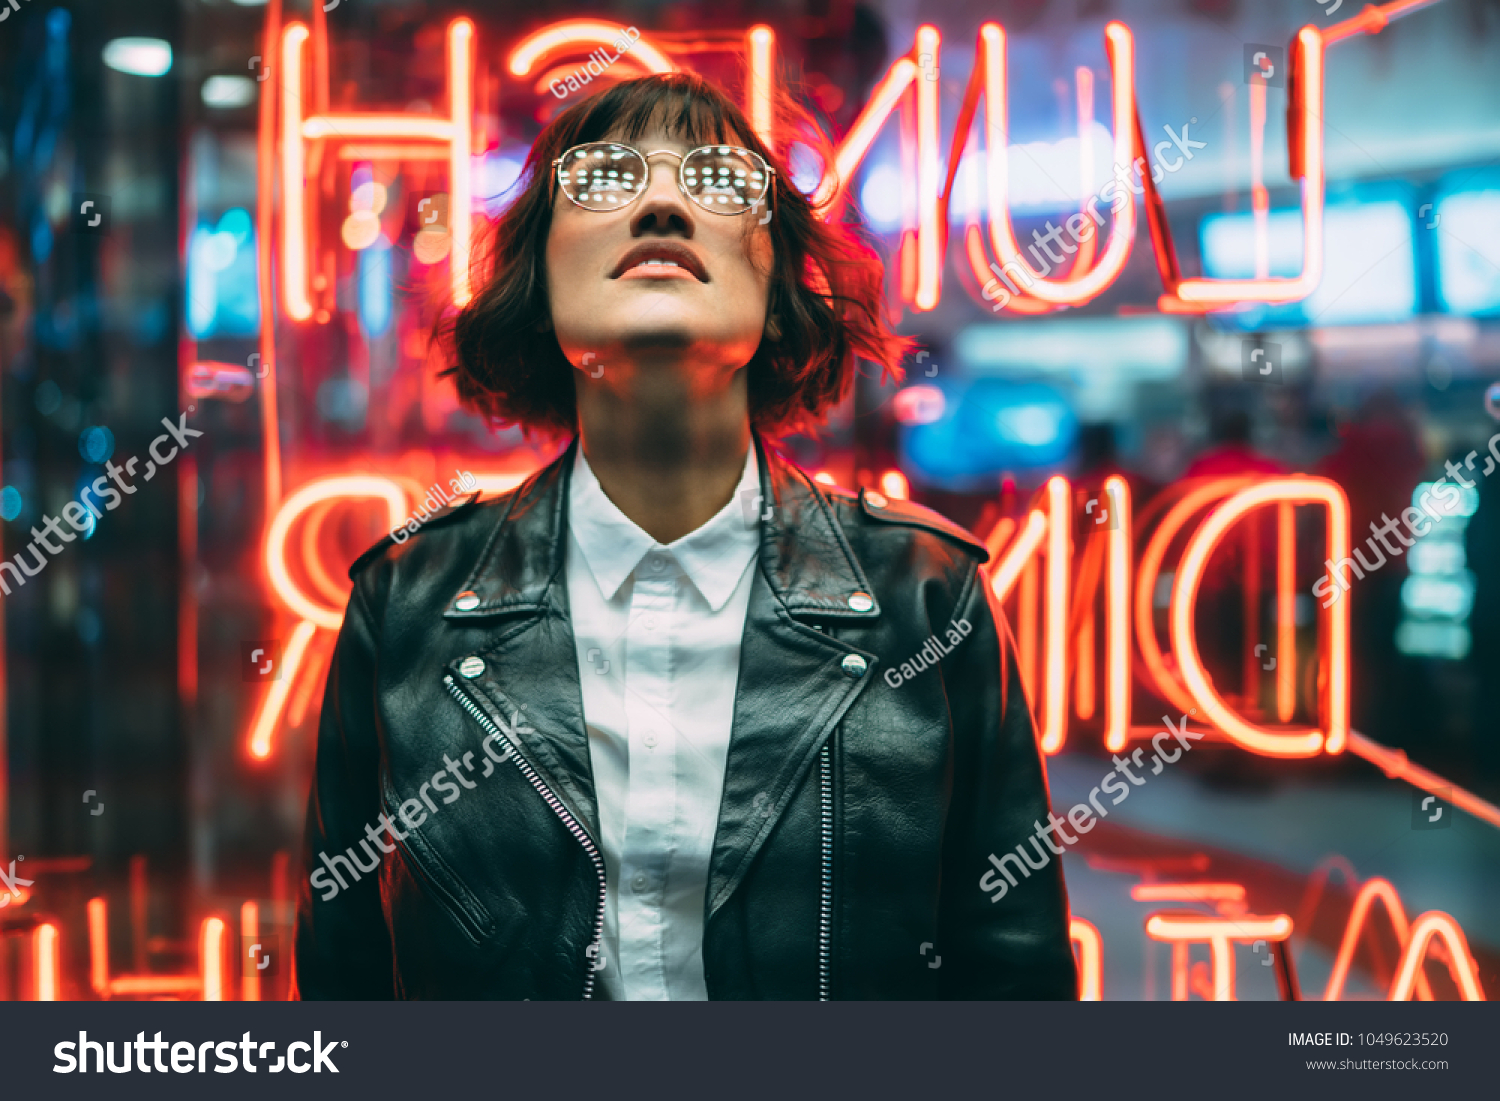 Stylish brunette woman in trendy apparel and eyewear looking up enjoying nightlife in city. Gorgeous fashion hipster girl in leather jacket standing outdoors on street with neon city illumination #1049623520